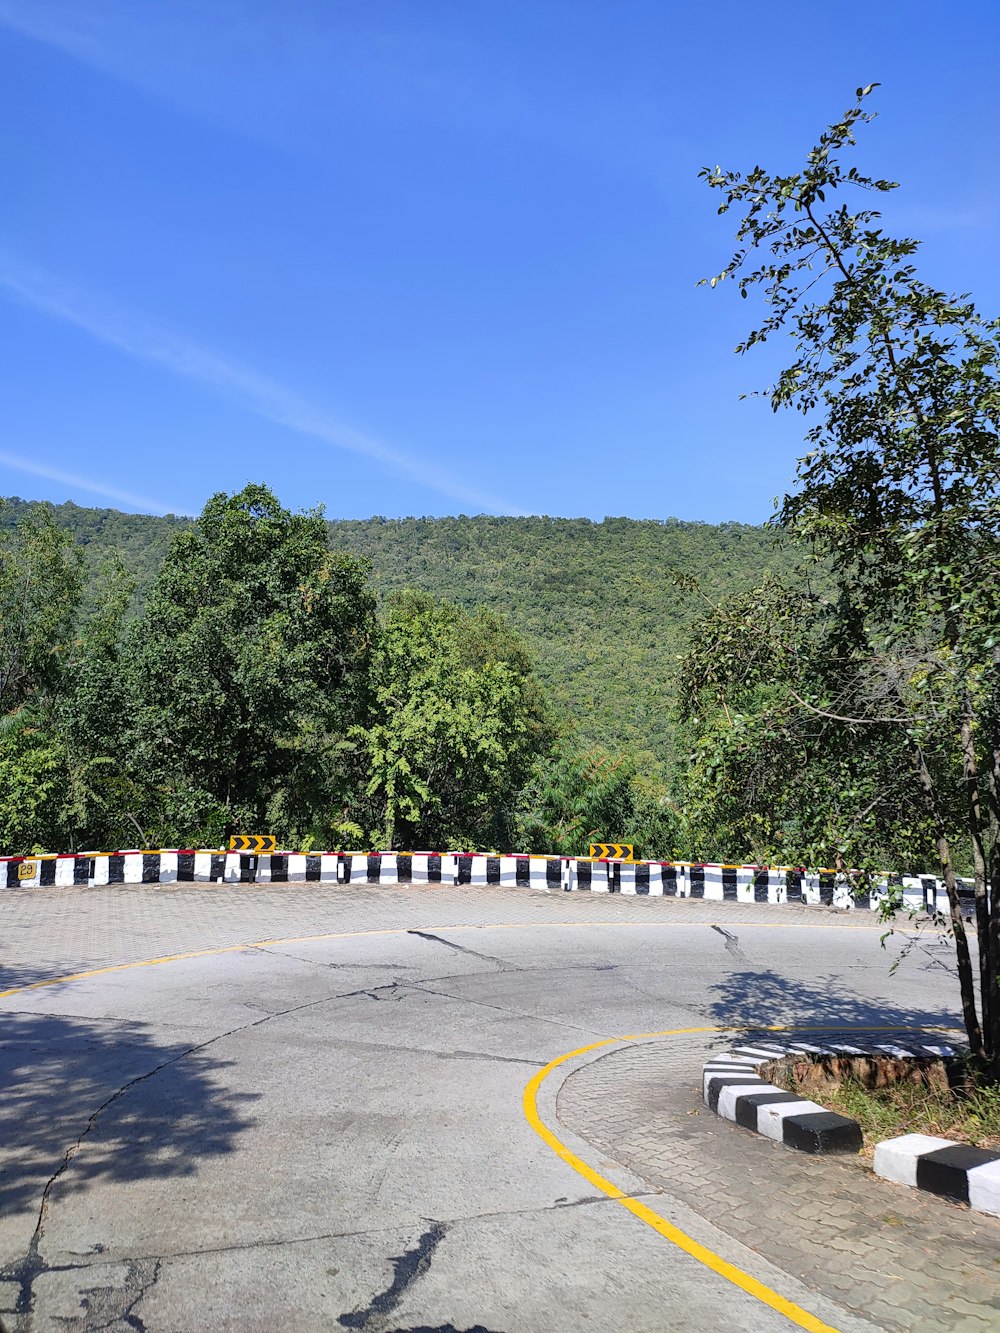 an empty parking lot surrounded by trees and hills